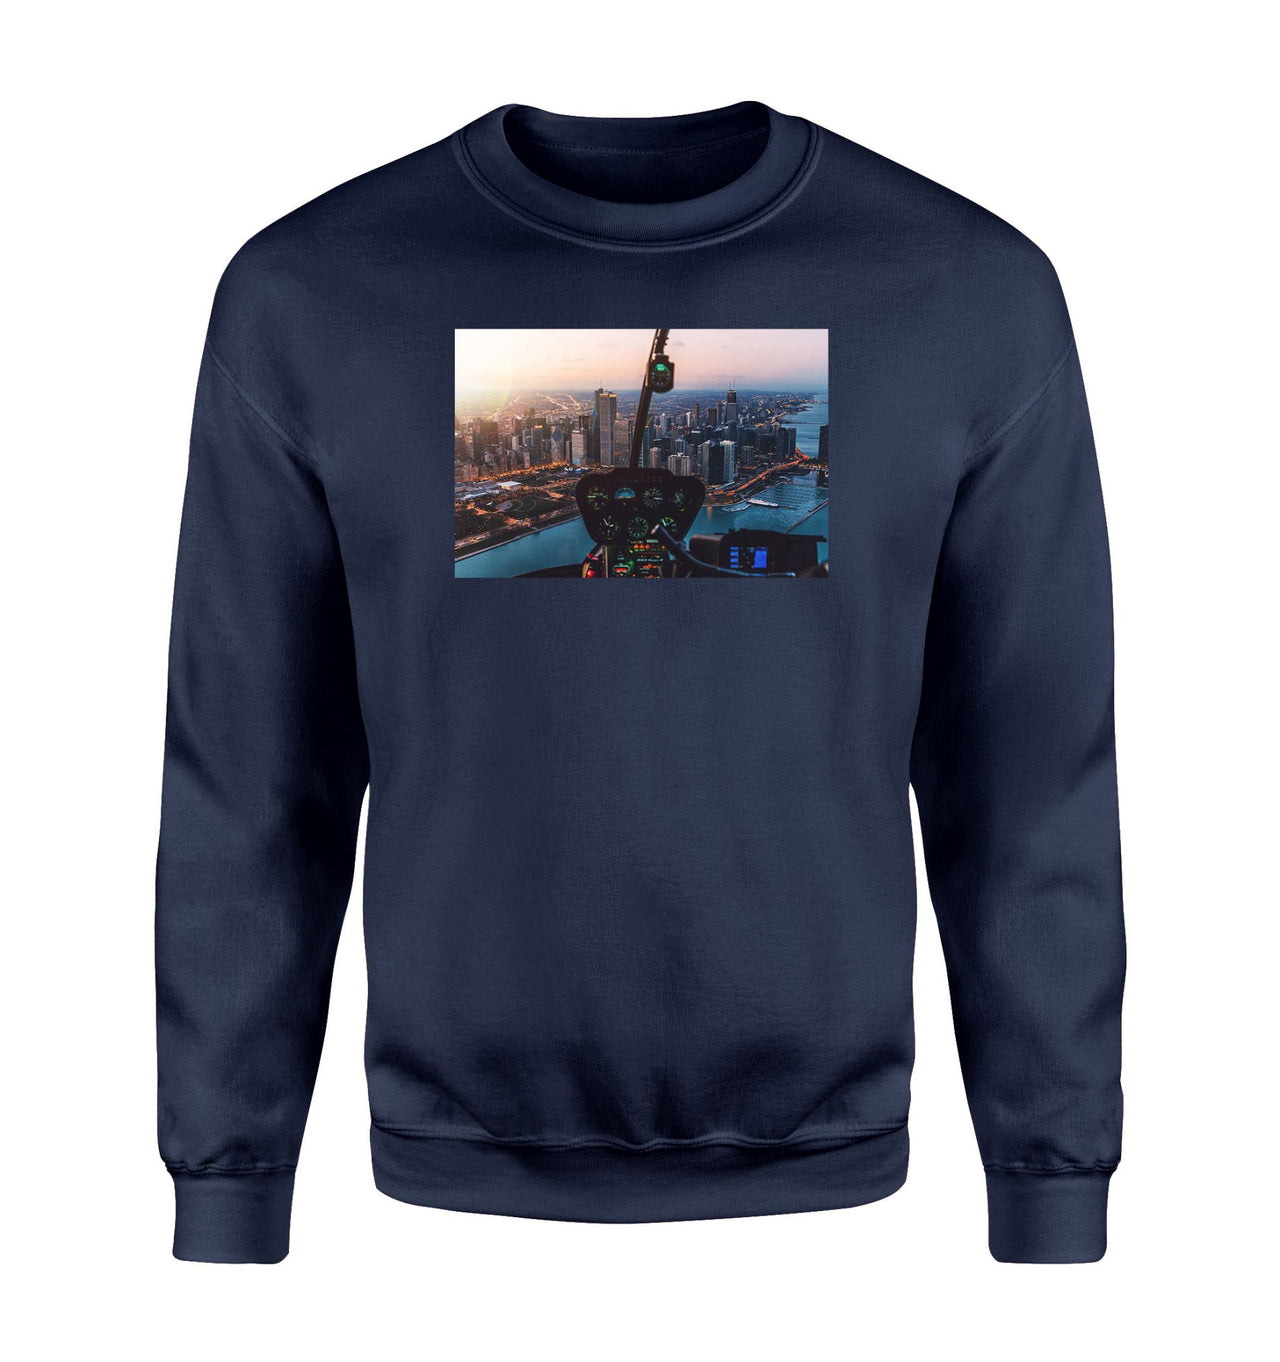 Amazing City View from Helicopter Cockpit Designed Sweatshirts